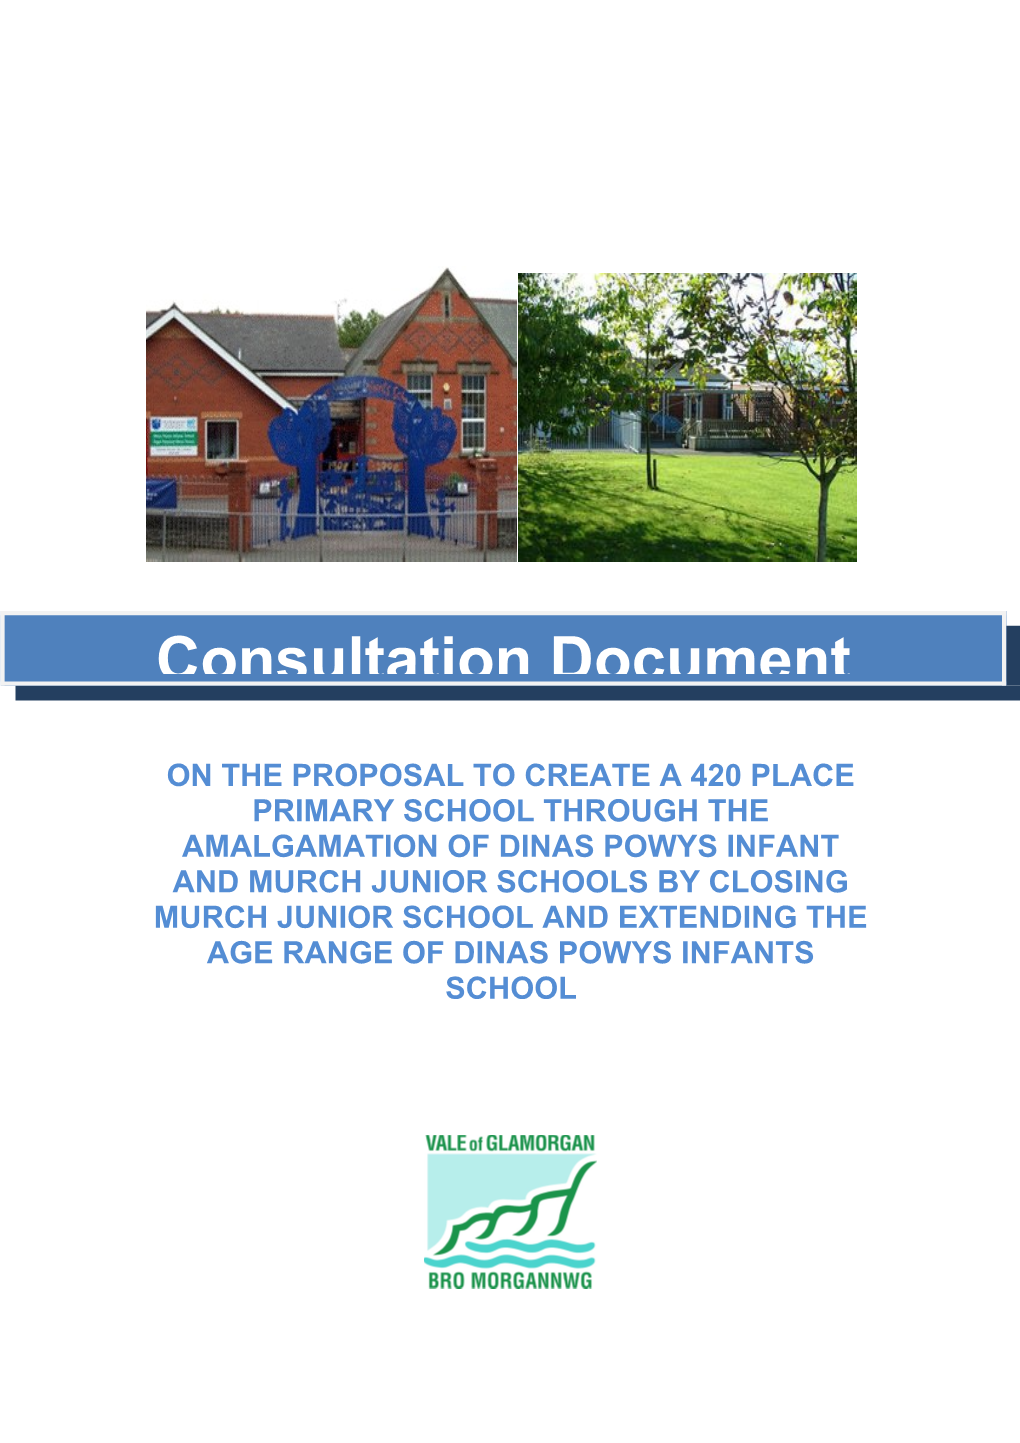 Consultation at the Vale of Glamorgan Council, Civic Offices, Holton Road, Barry CF63 4RU